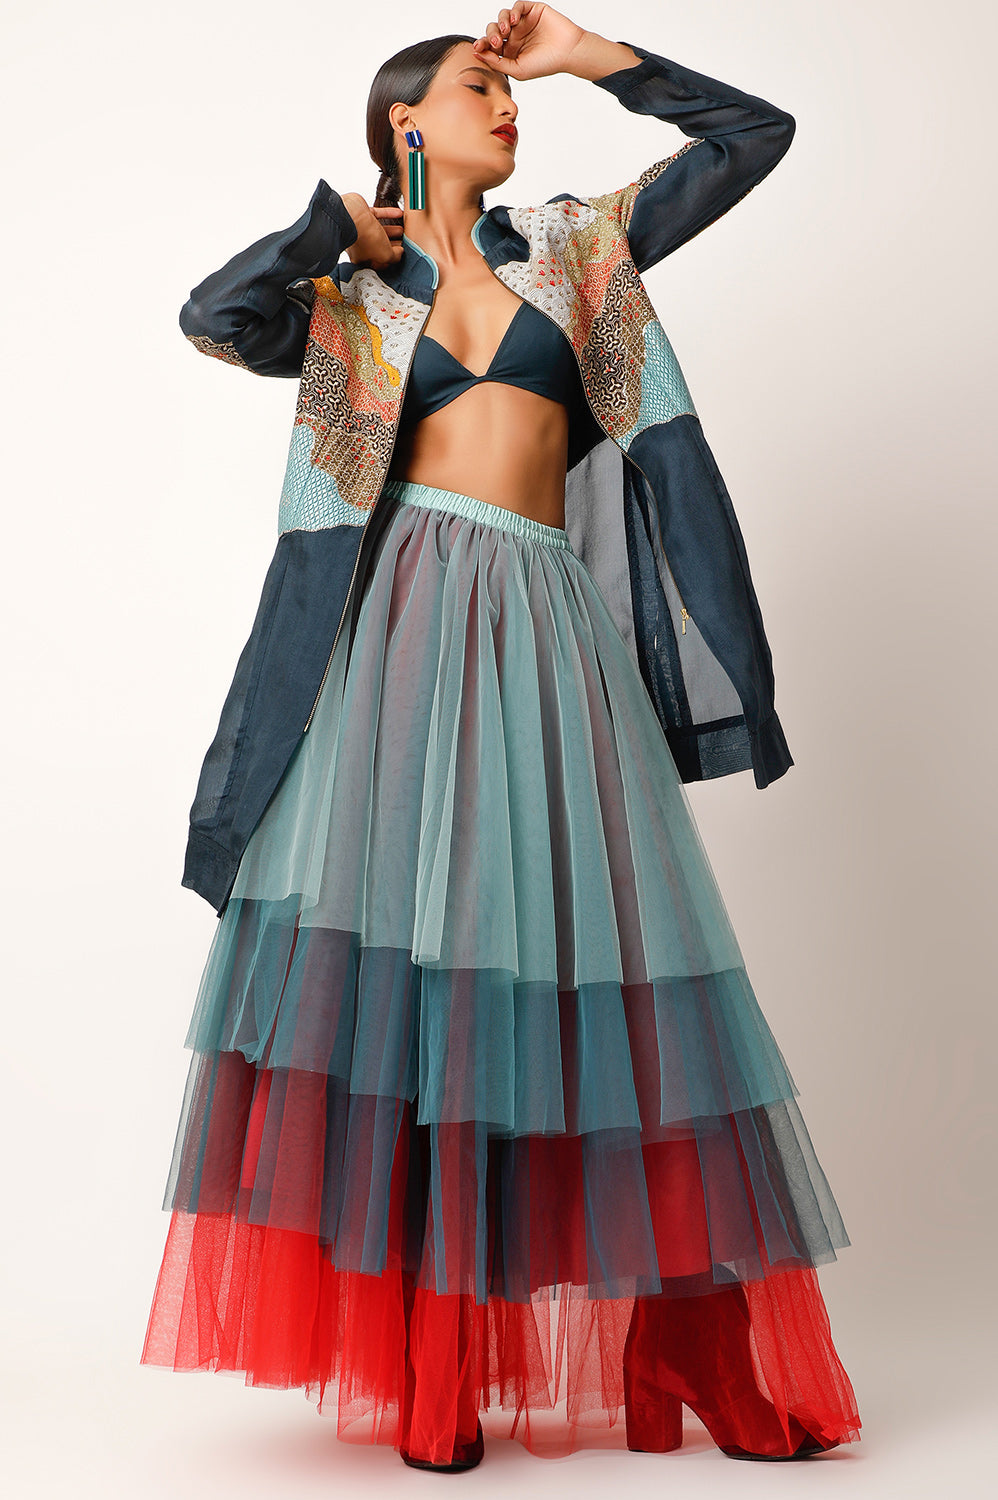 MULTICOLORED TULLE SKIRT